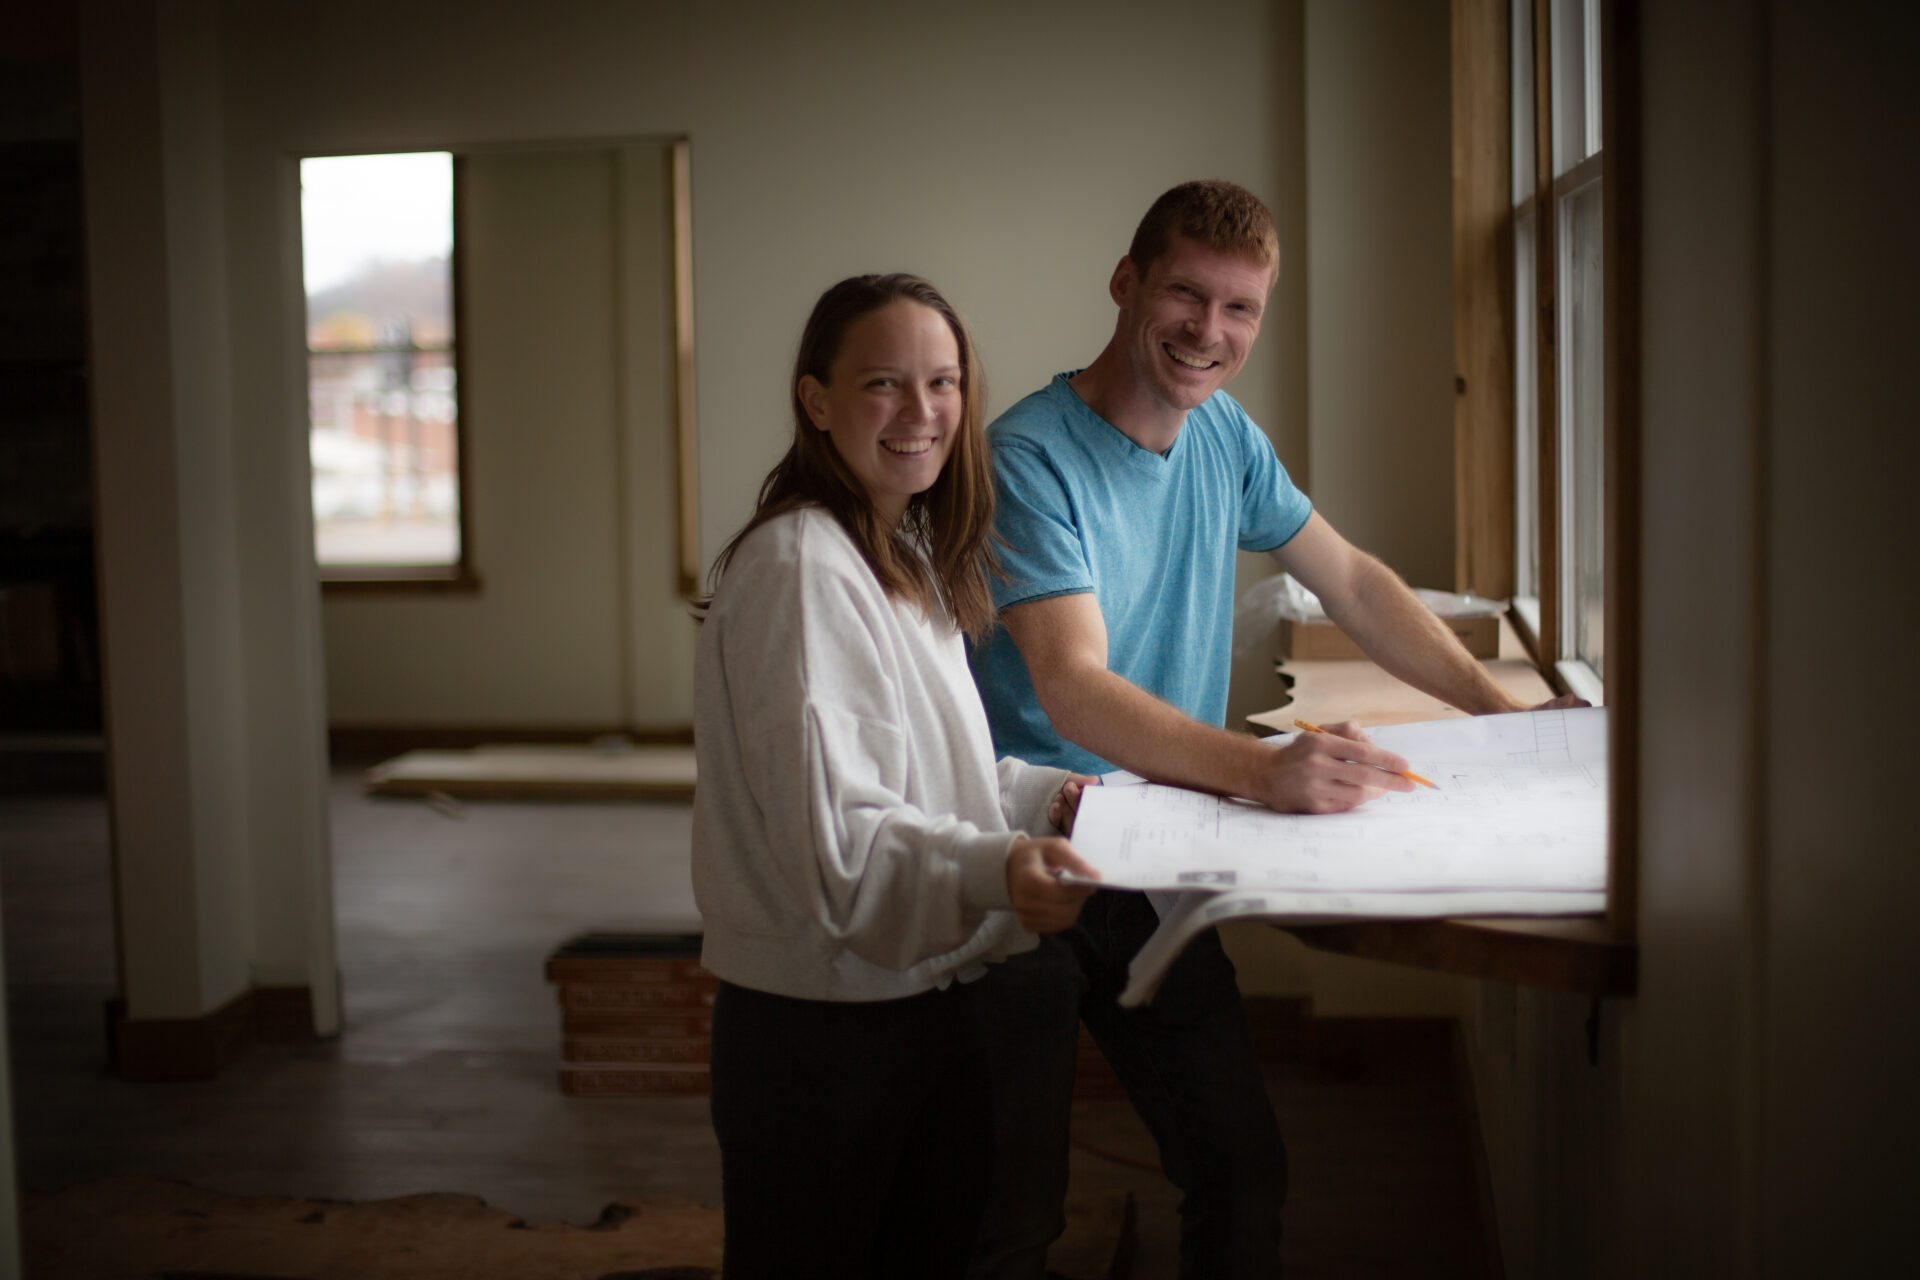 Jessica and Jesse Shelton share traditional tea service and a liberal arts philosophy in Johnson City, Tennessee at the philosophers house. They are pictured around a counter holding a pencil and business model plans